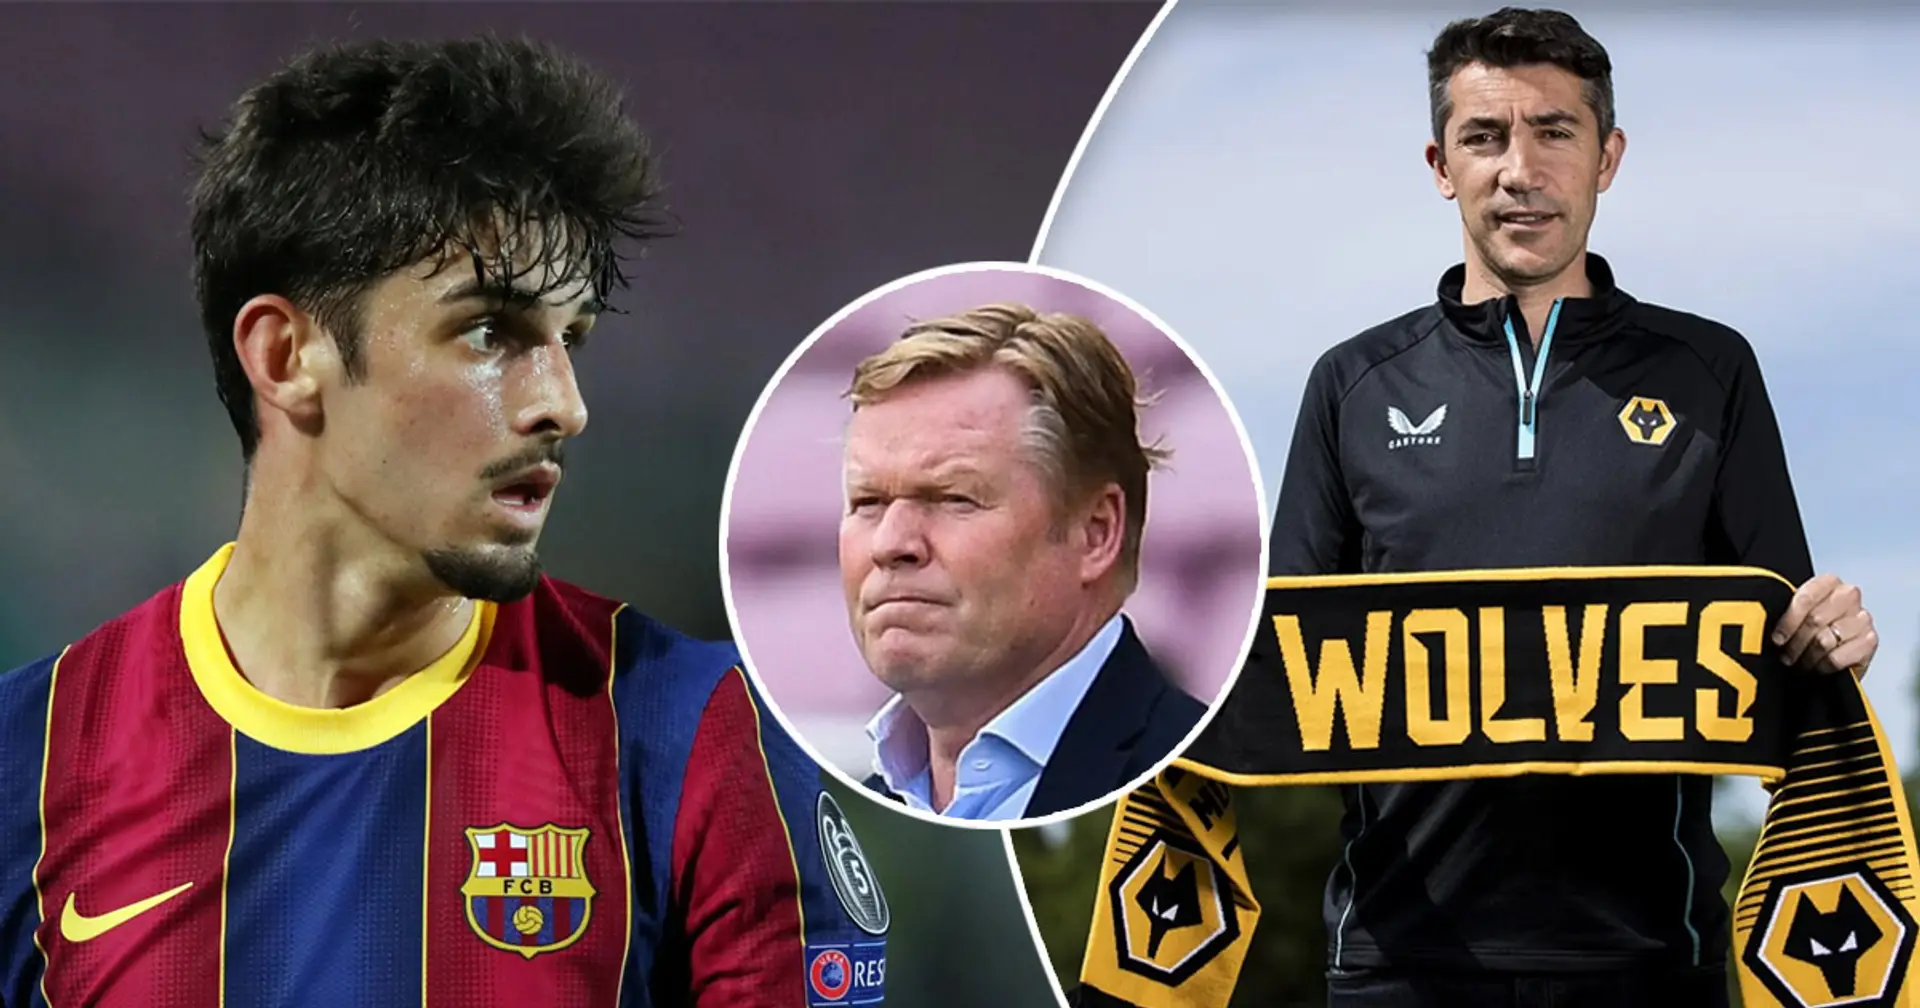 Trincao among 'potential targets' for new Wolves manager Bruno Lage: Fabrizio Romano (reliability: 5 stars)